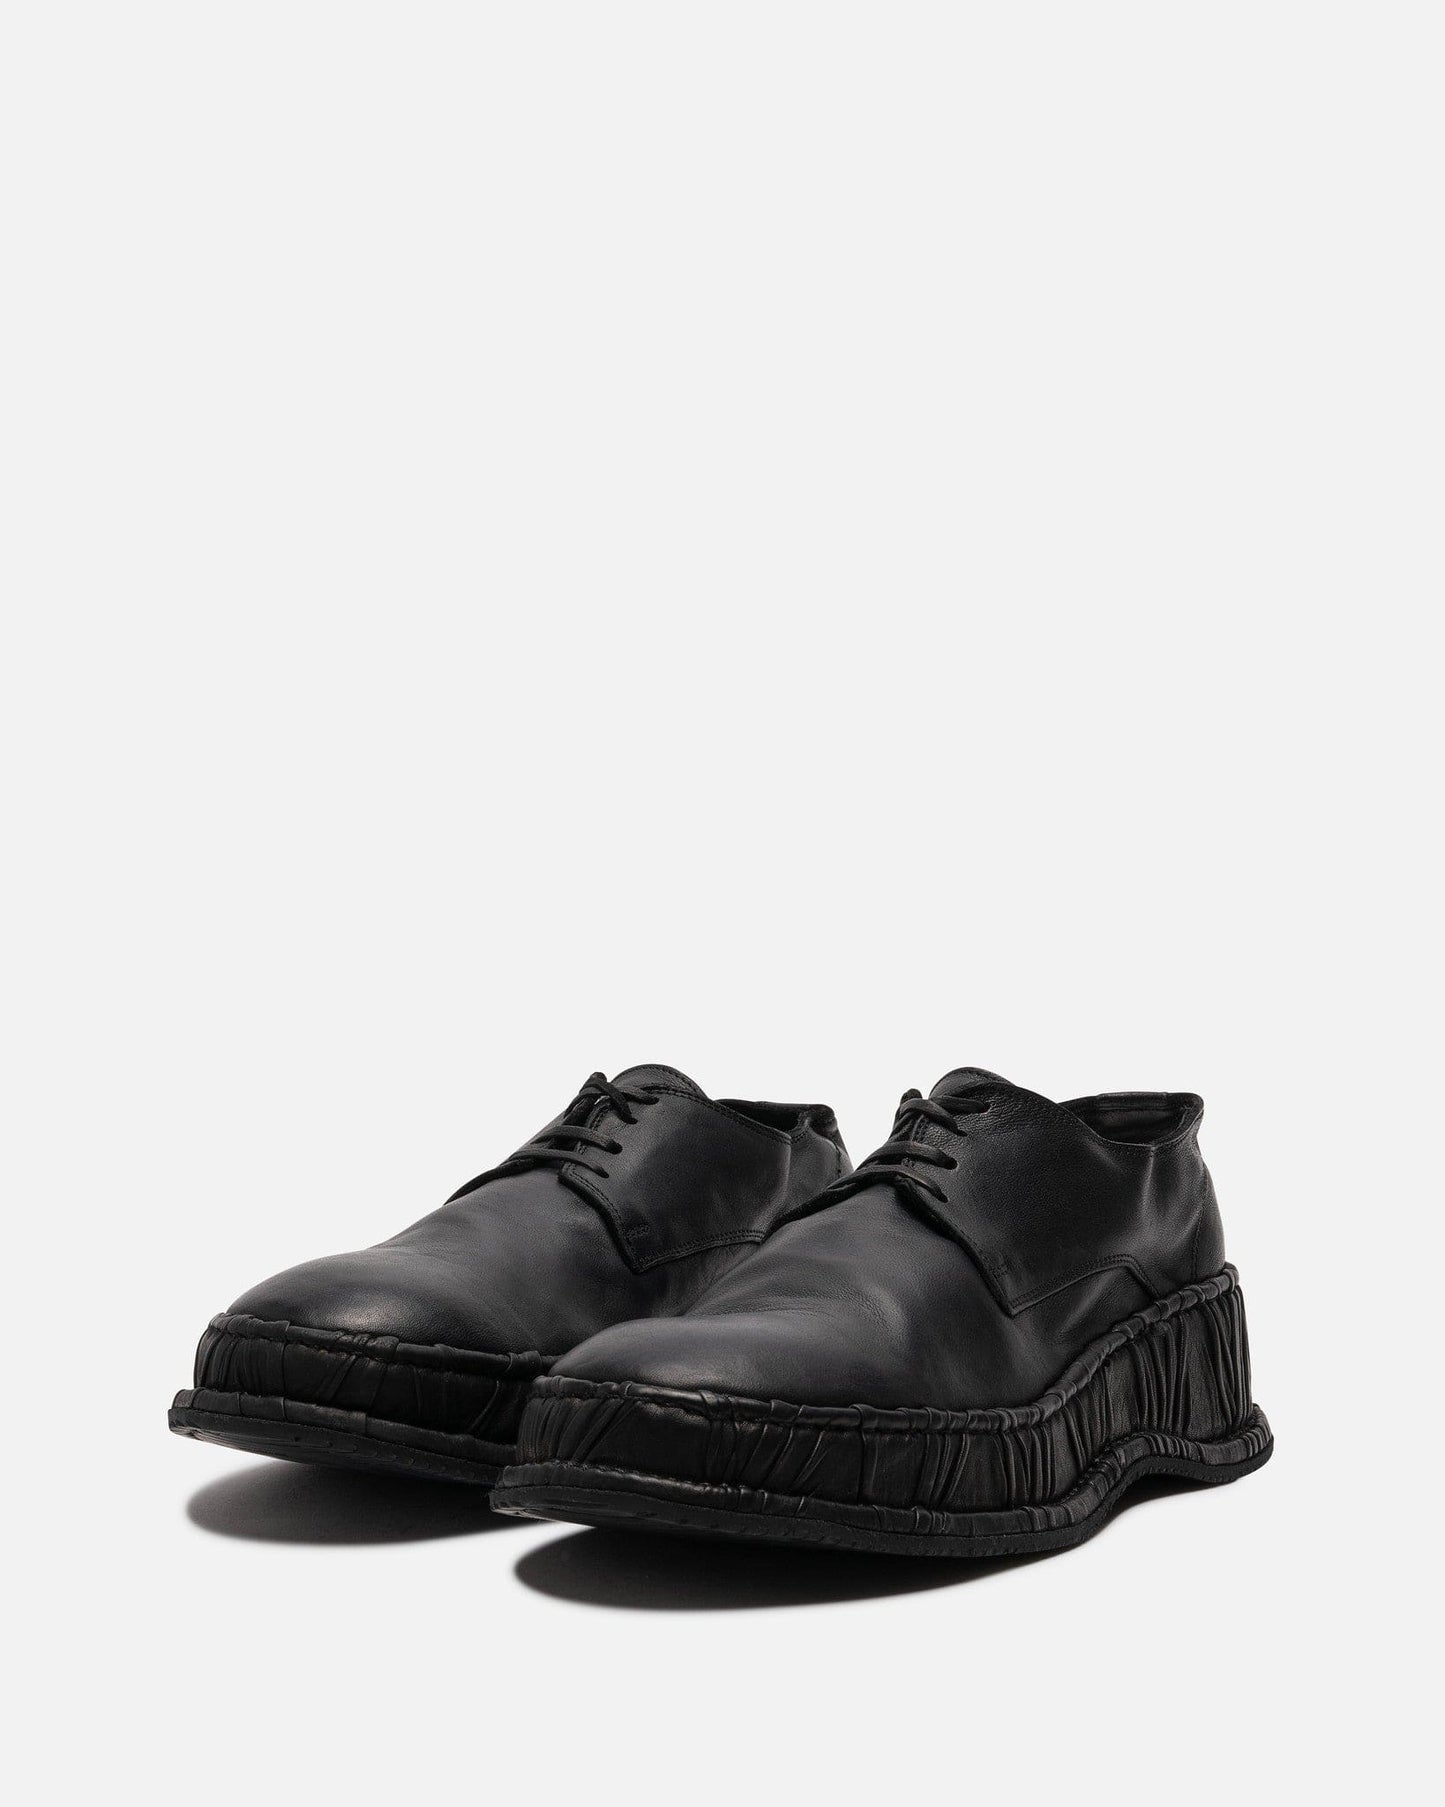 Guidi Men's Shoes SVRN Exclusive Men's 792F Wrinkled Wrap Sole Classic Derby in Black